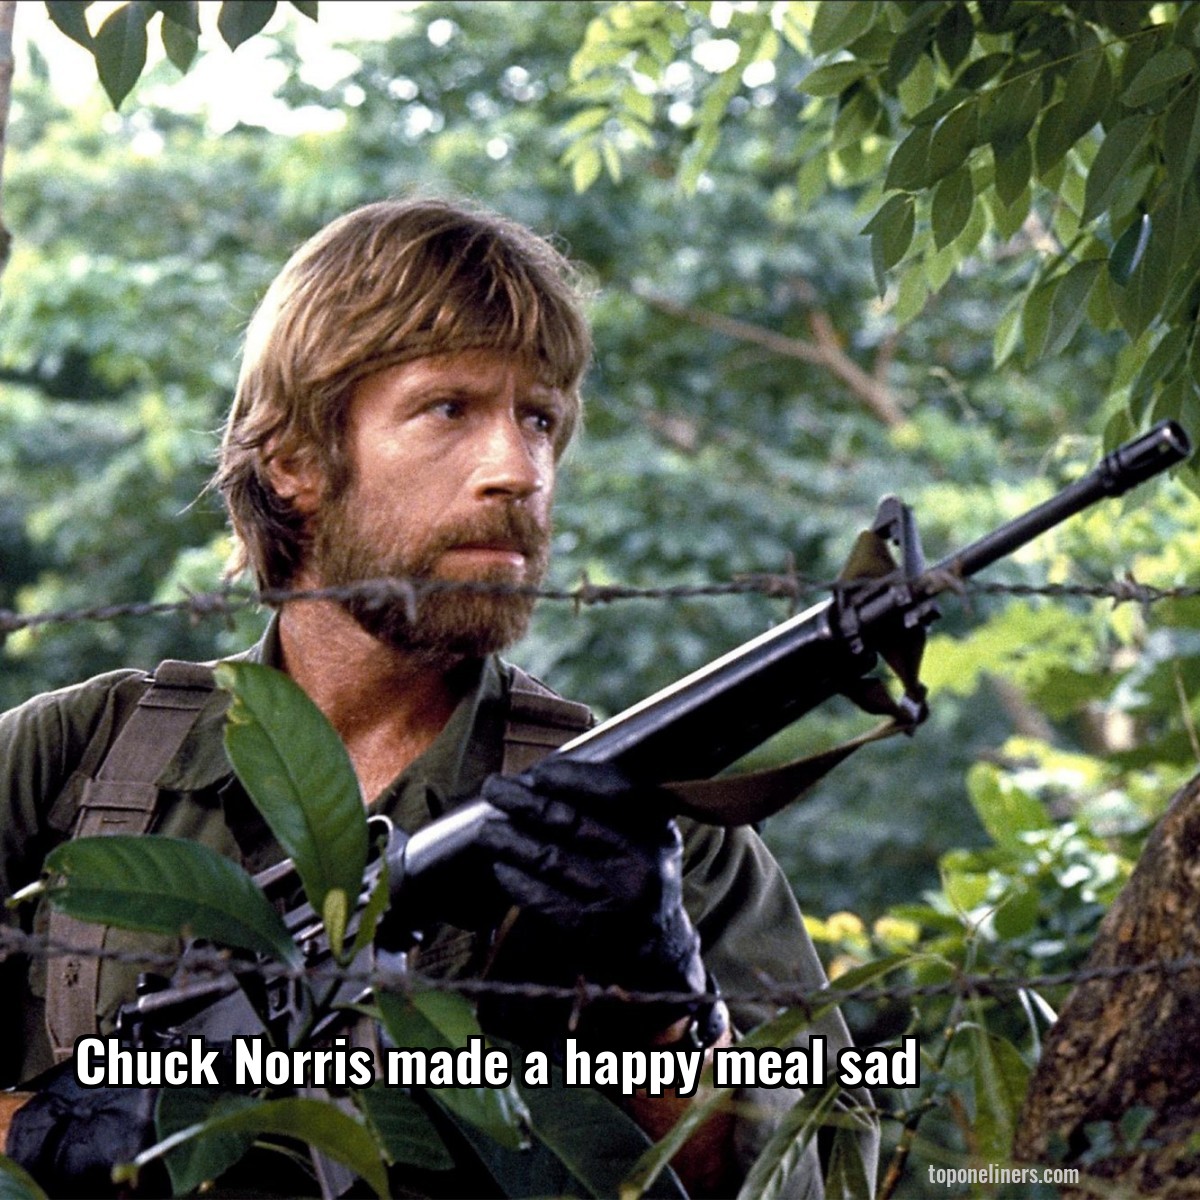 Chuck Norris made a happy meal sad